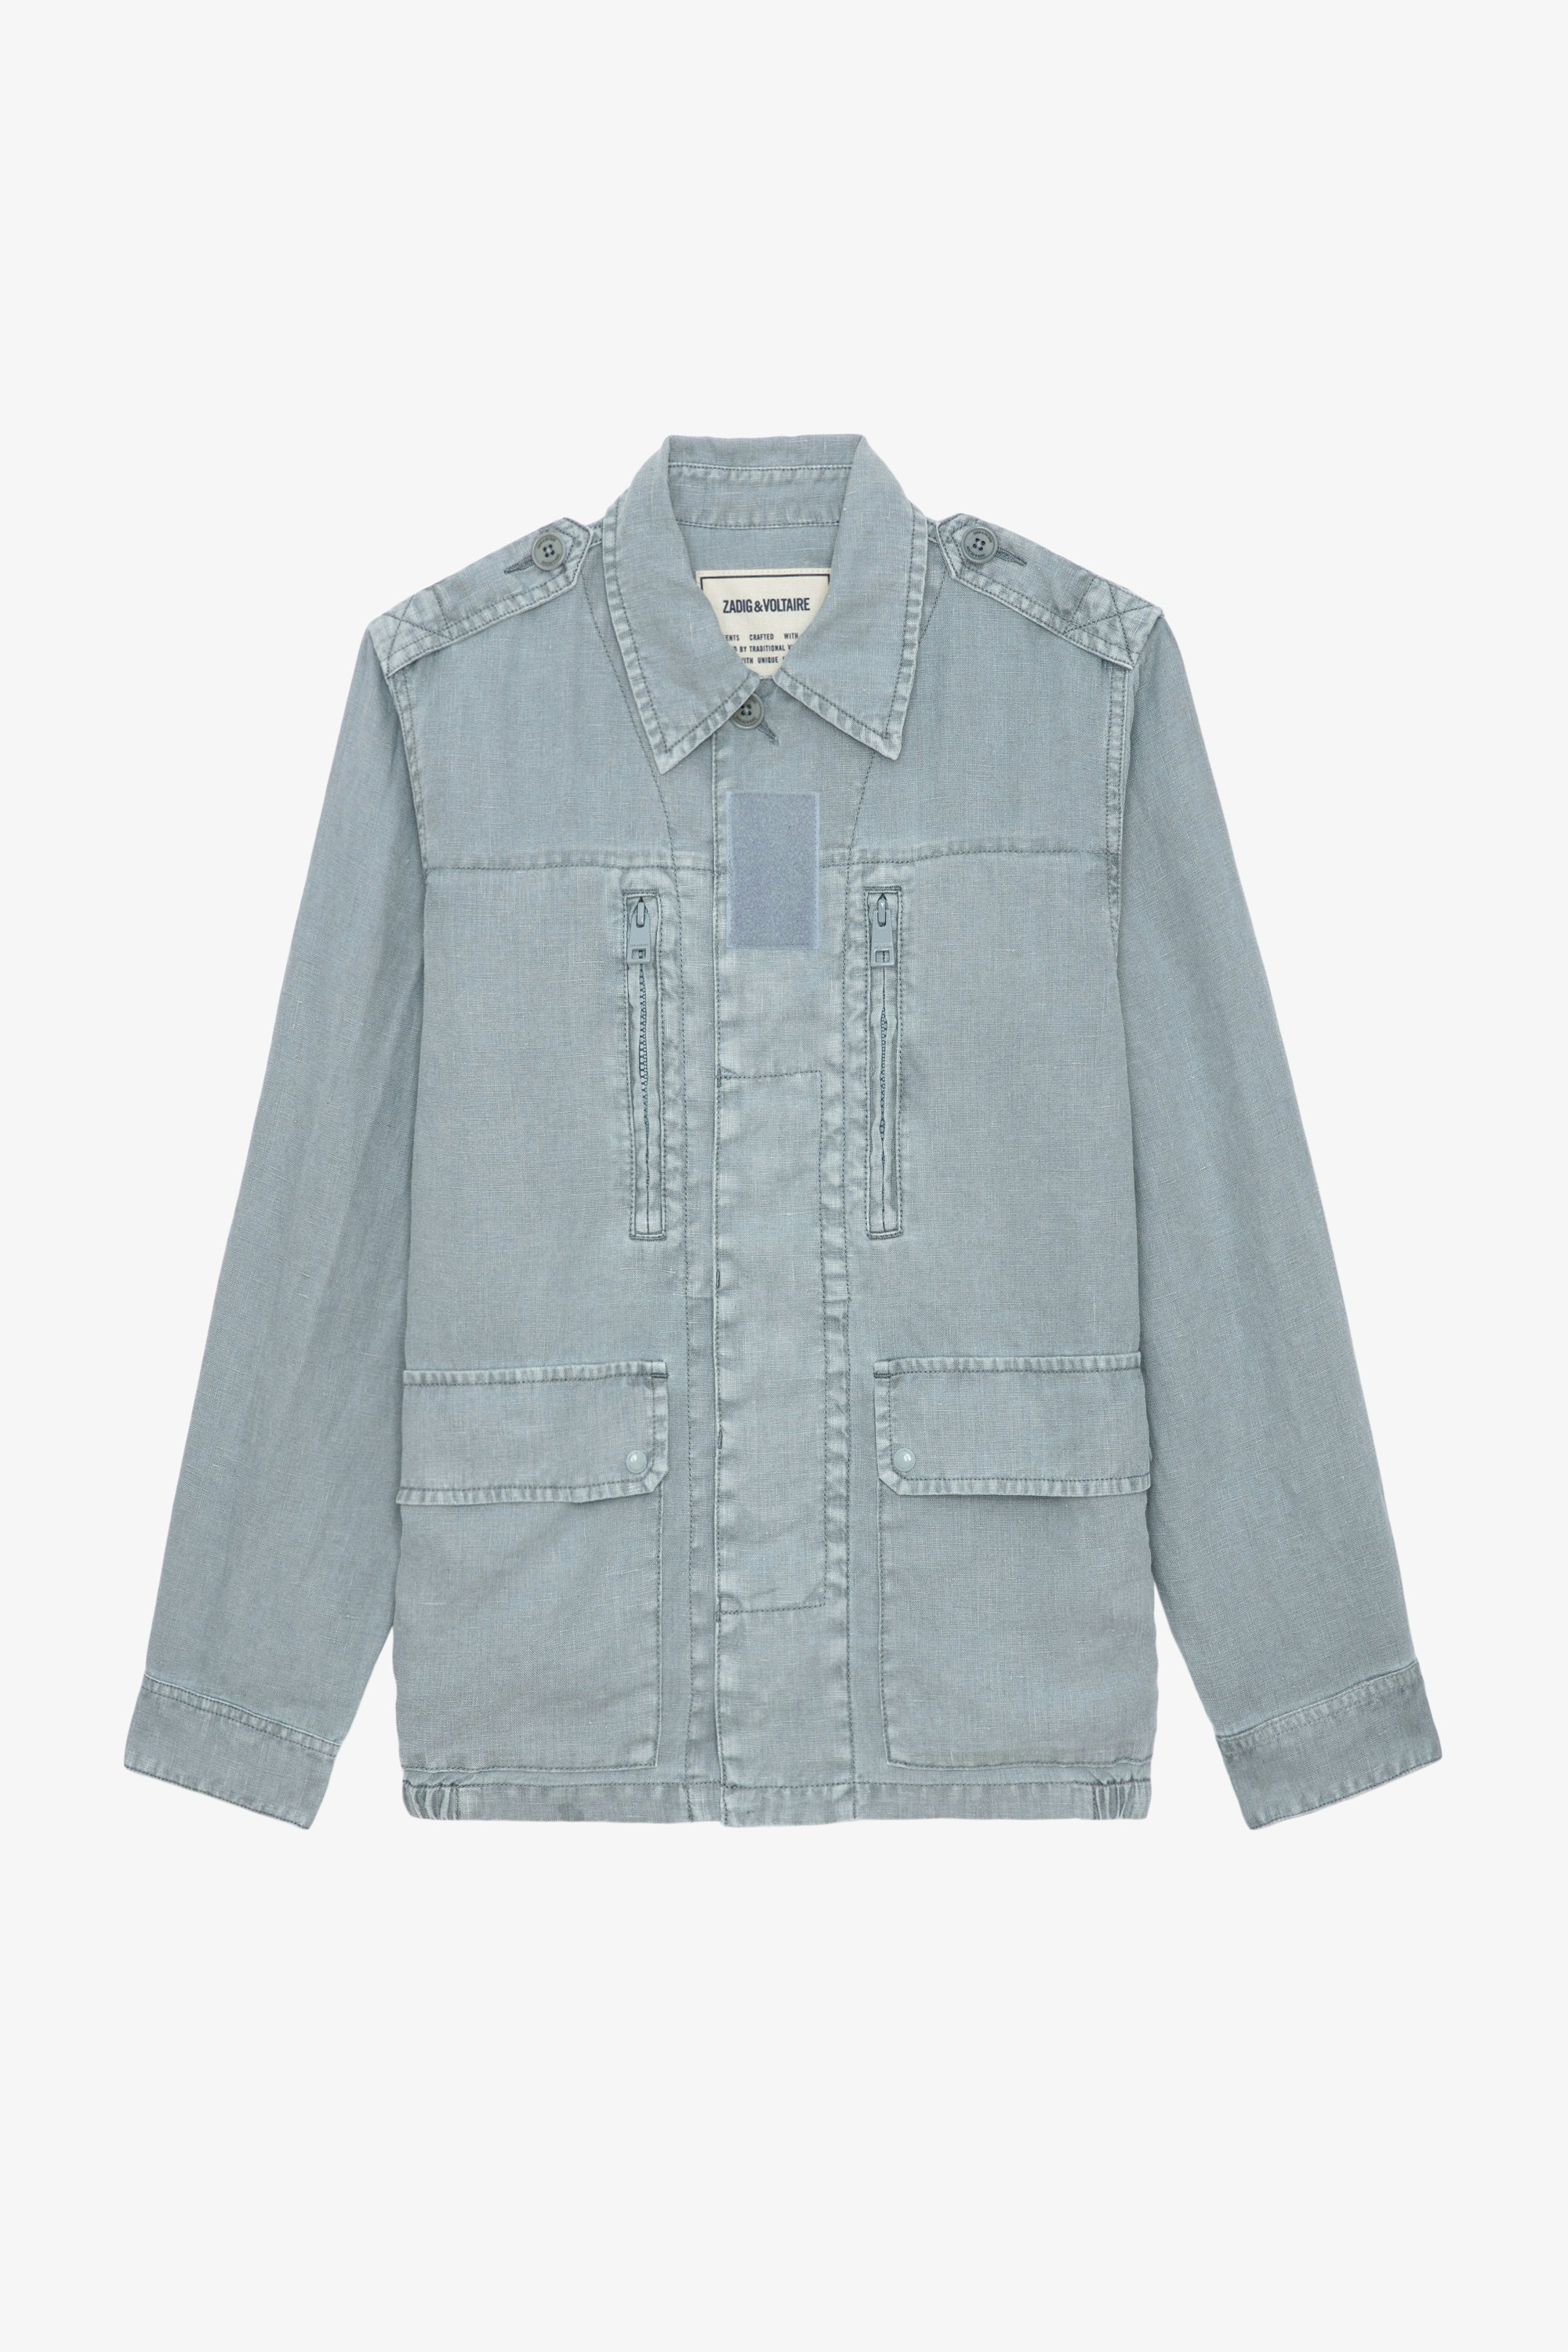 Kid Linen Jacket - Light blue linen military jacket with pockets and wings and skull motif on the back.